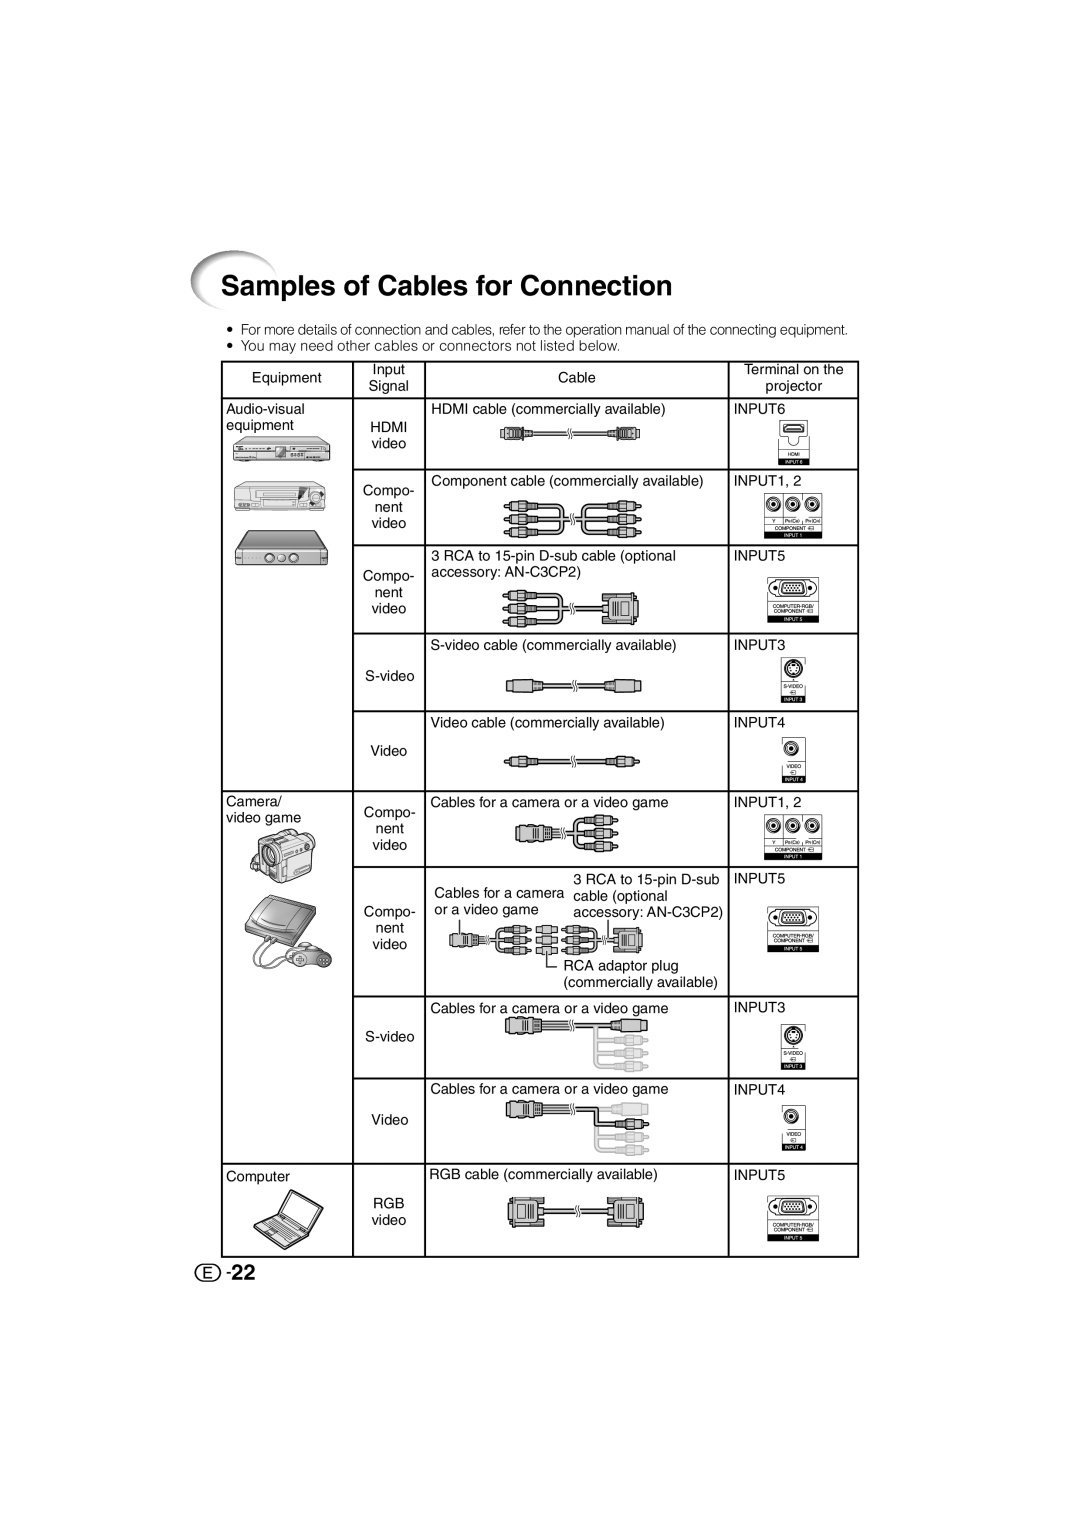 Sharp XV-Z3000U operation manual Samples of Cables for Connection 